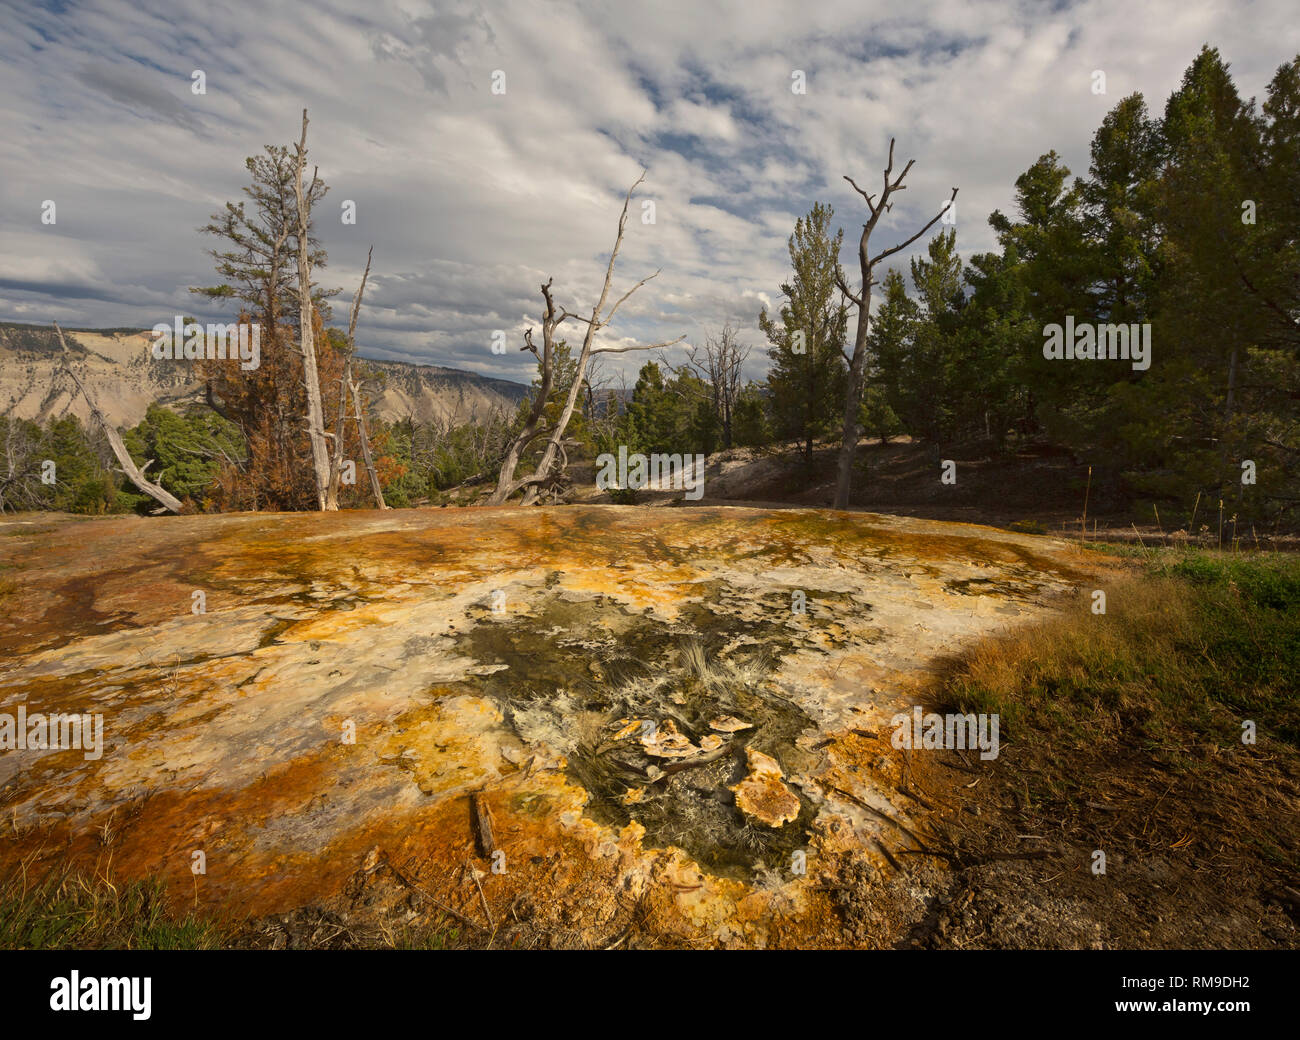 WY03492-00...WYOMING - White Elephant Back Terrace in the upper area of Mammoth Hot Spring of Yellowstone National Park. Stock Photo